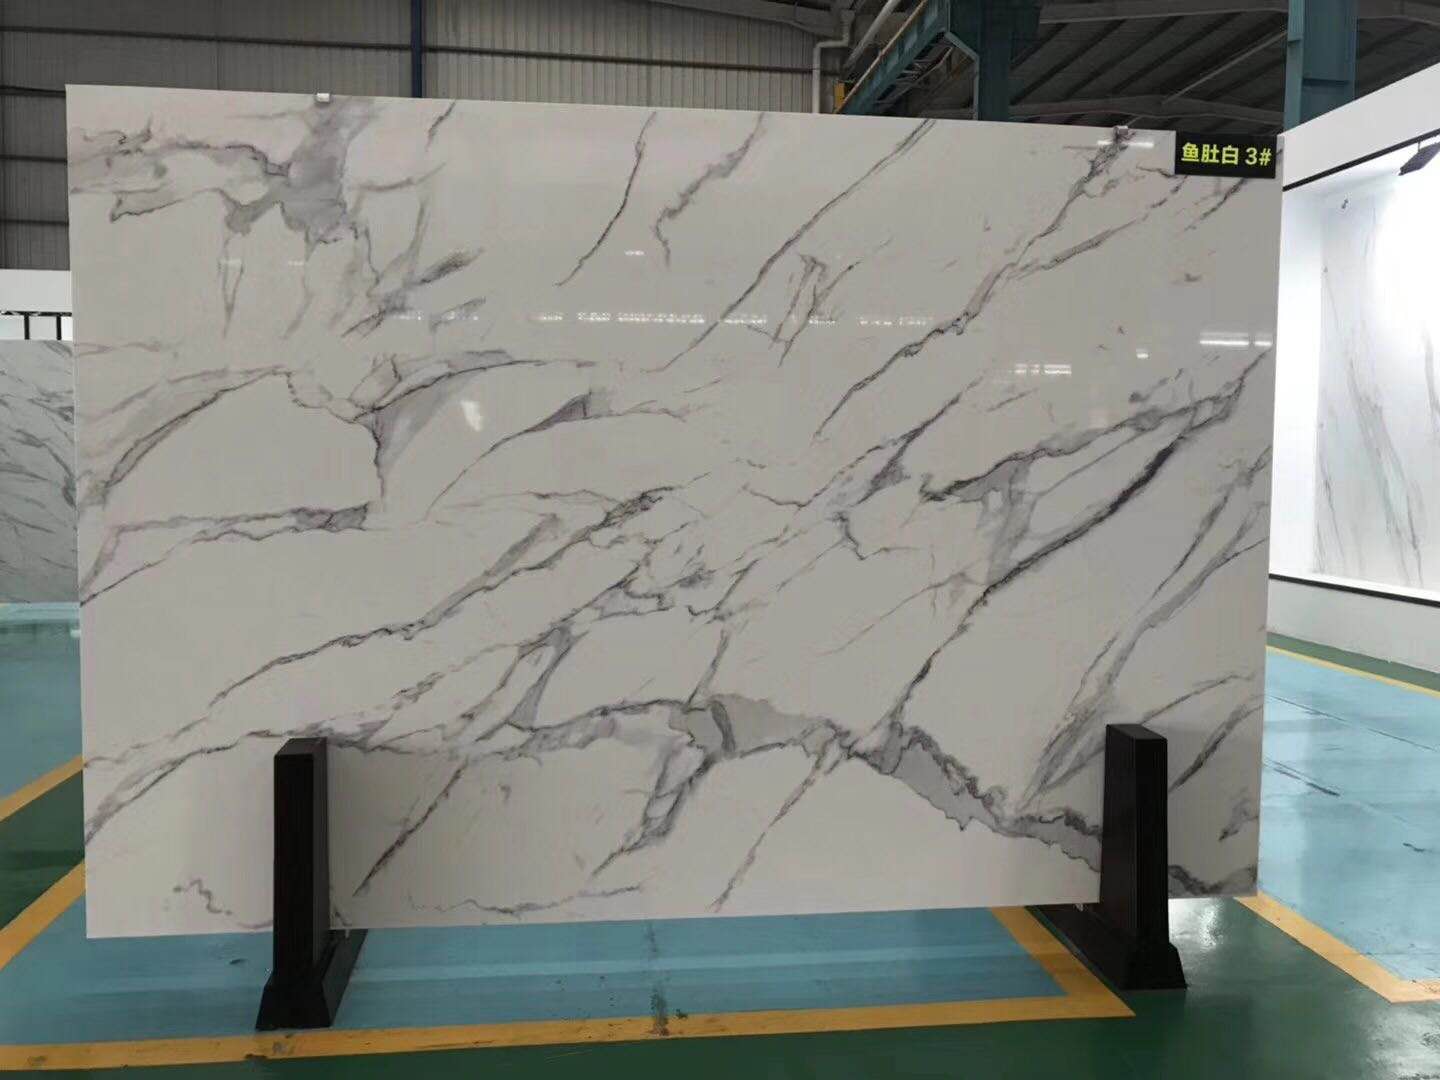 3D print boards 3D artificial marble slabs